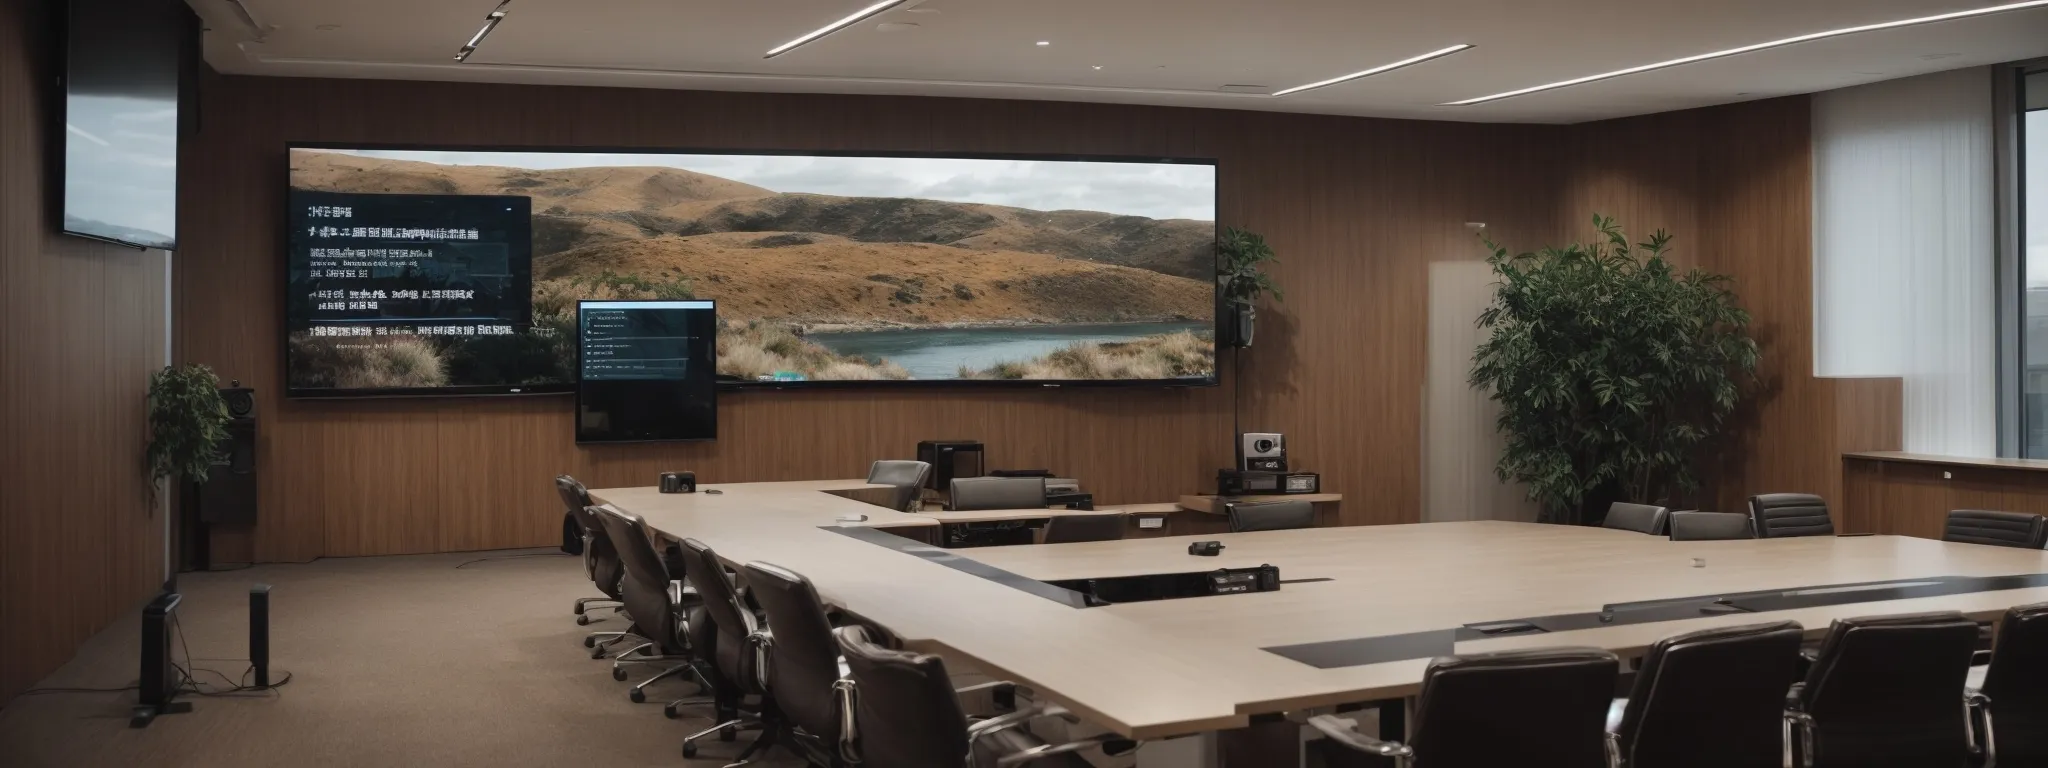 a photo of a modern, professional meeting room with a large screen displaying a website interface, symbolizing b2g directory listings and online networking.